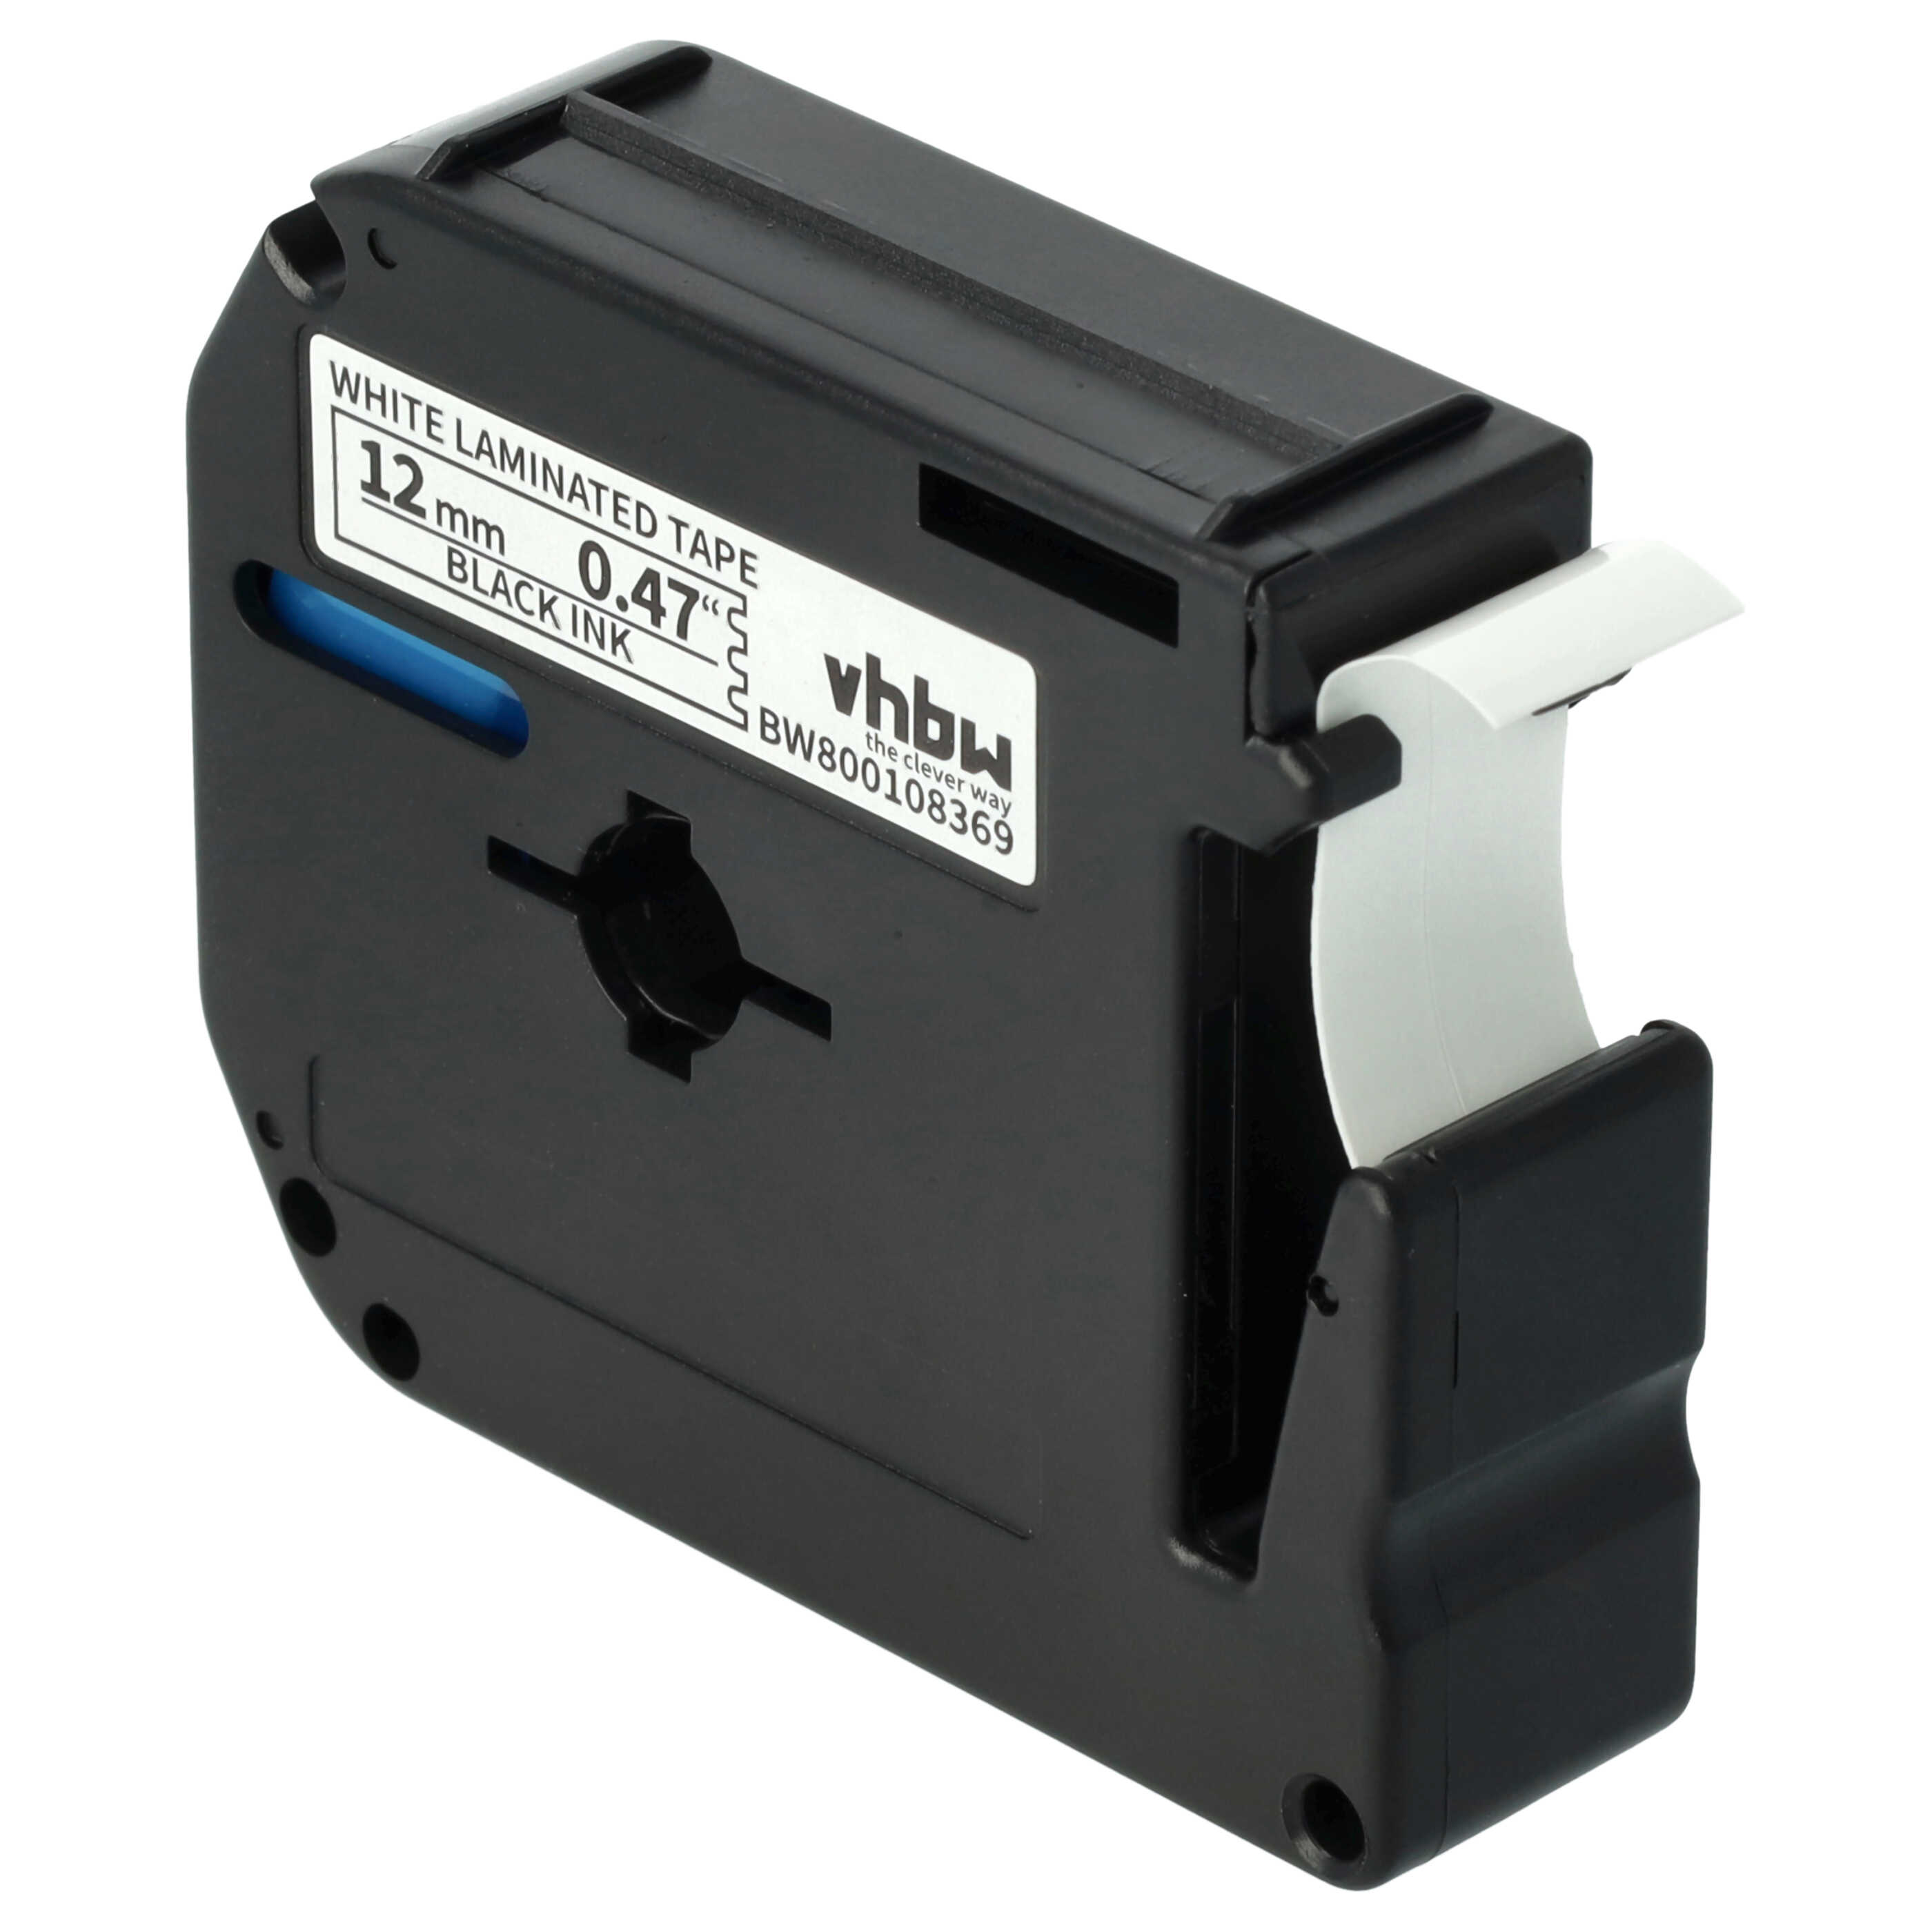 Label Tape as Replacement for Brother M-K231 - 12 mm Black to White